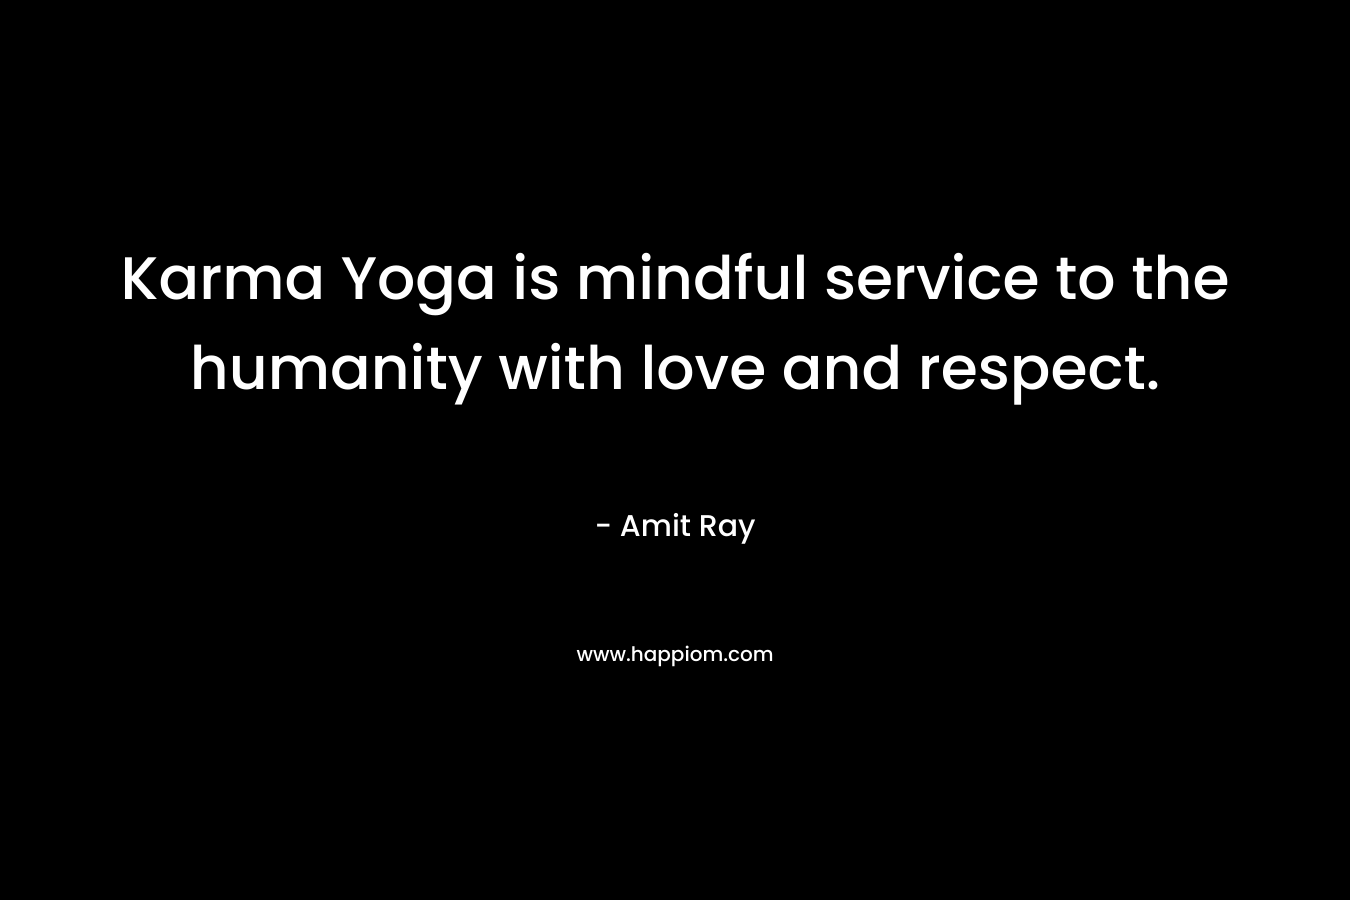 Karma Yoga is mindful service to the humanity with love and respect. – Amit Ray